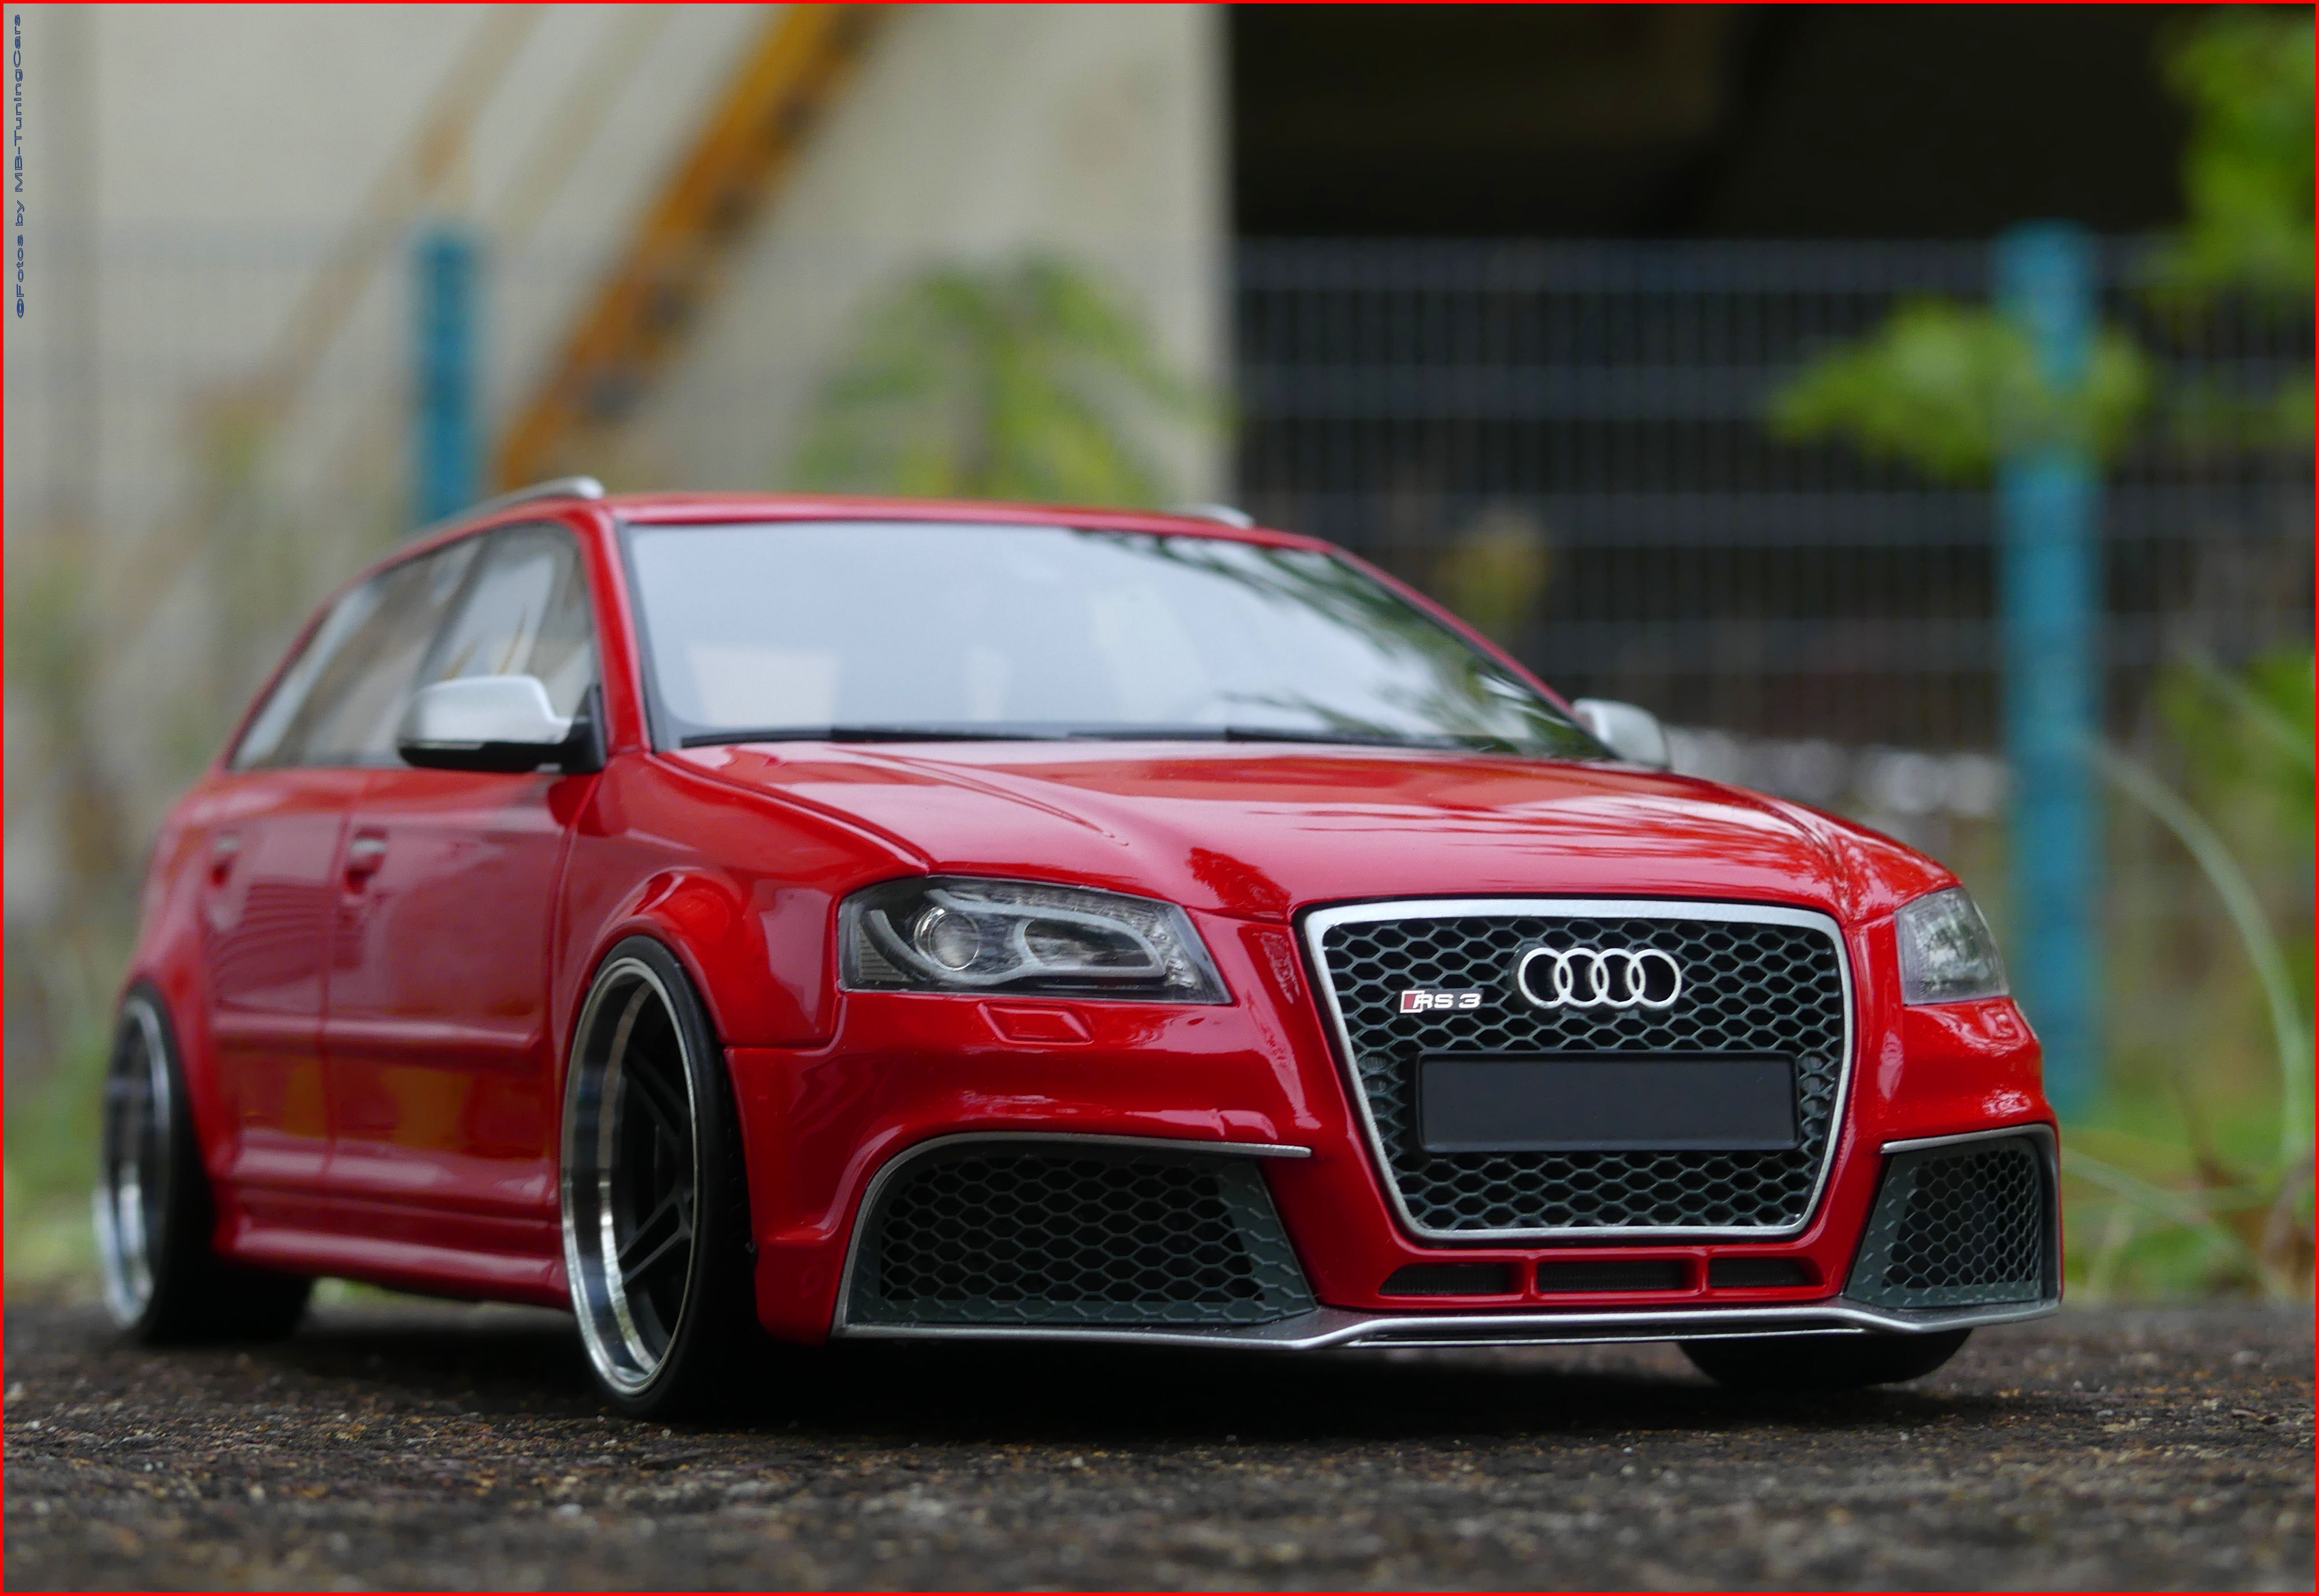 MB-TuningCars - 1:18 Audi A3 RS3 8P Misano Red Edition + Concave